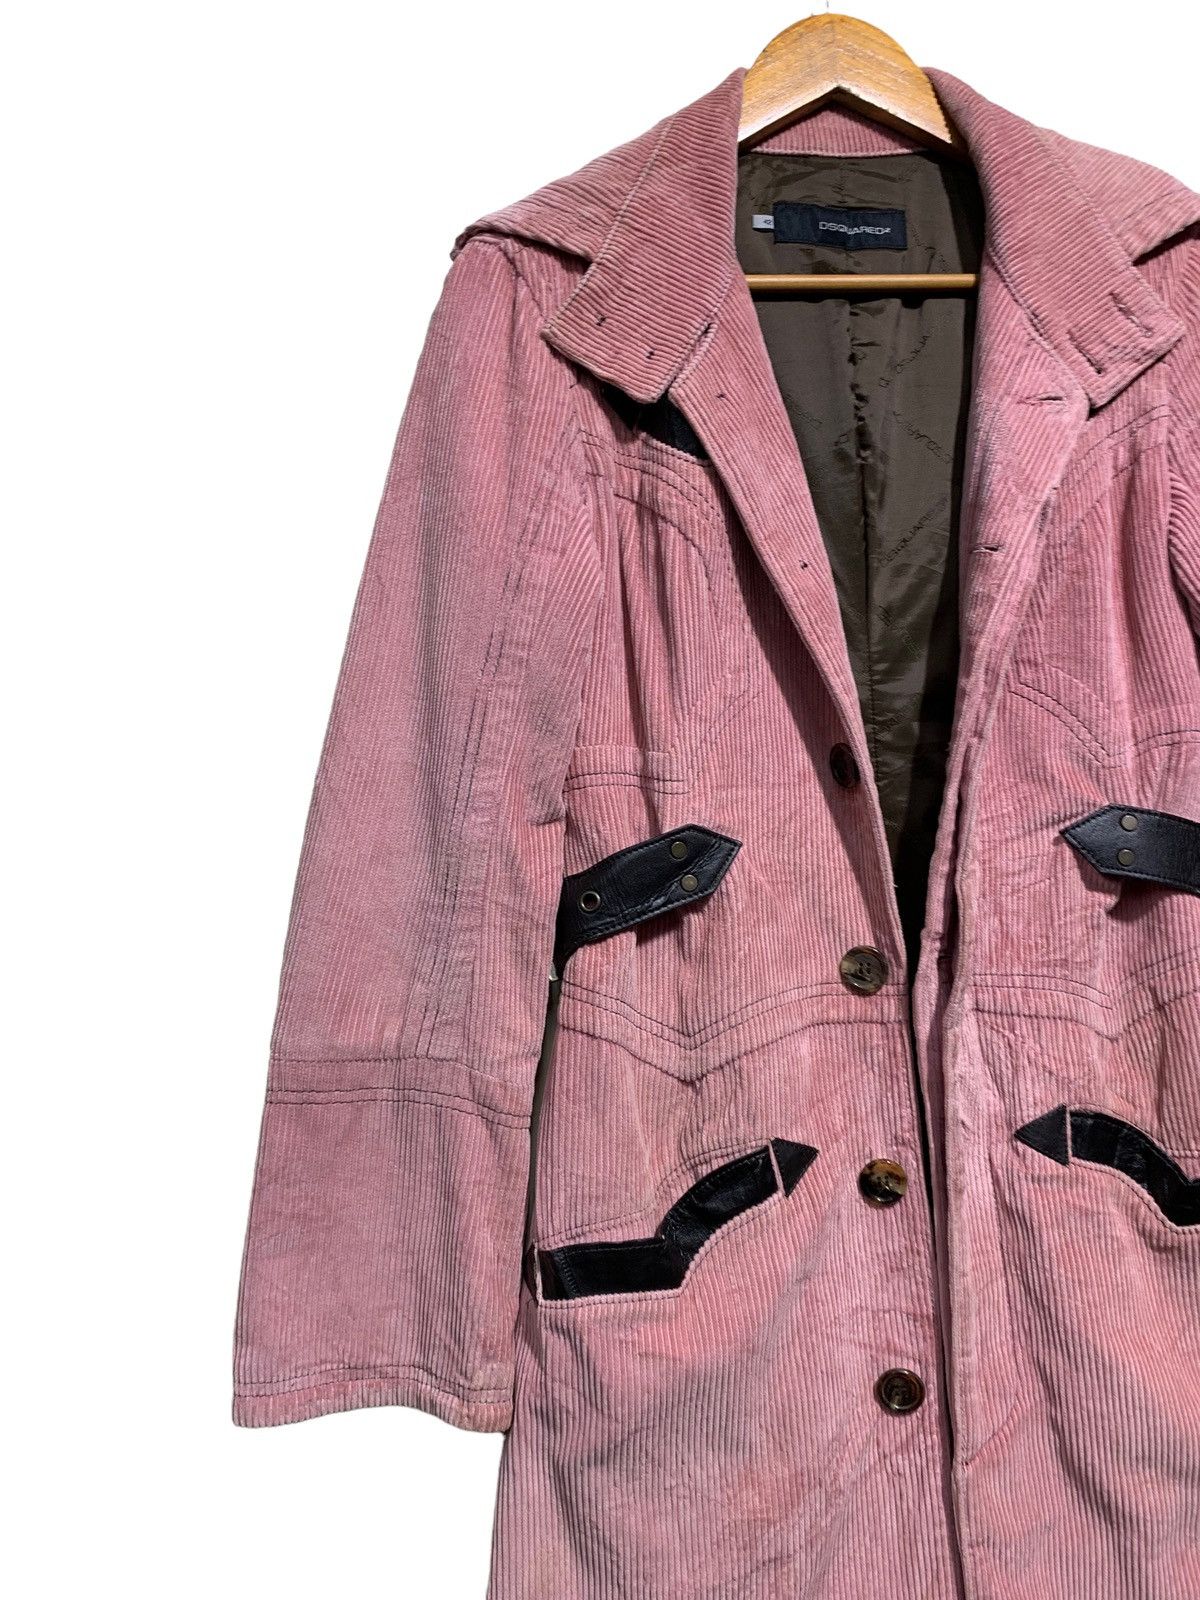 🔥DSQUARED2 CORDUROY TRENCH COATS - 2